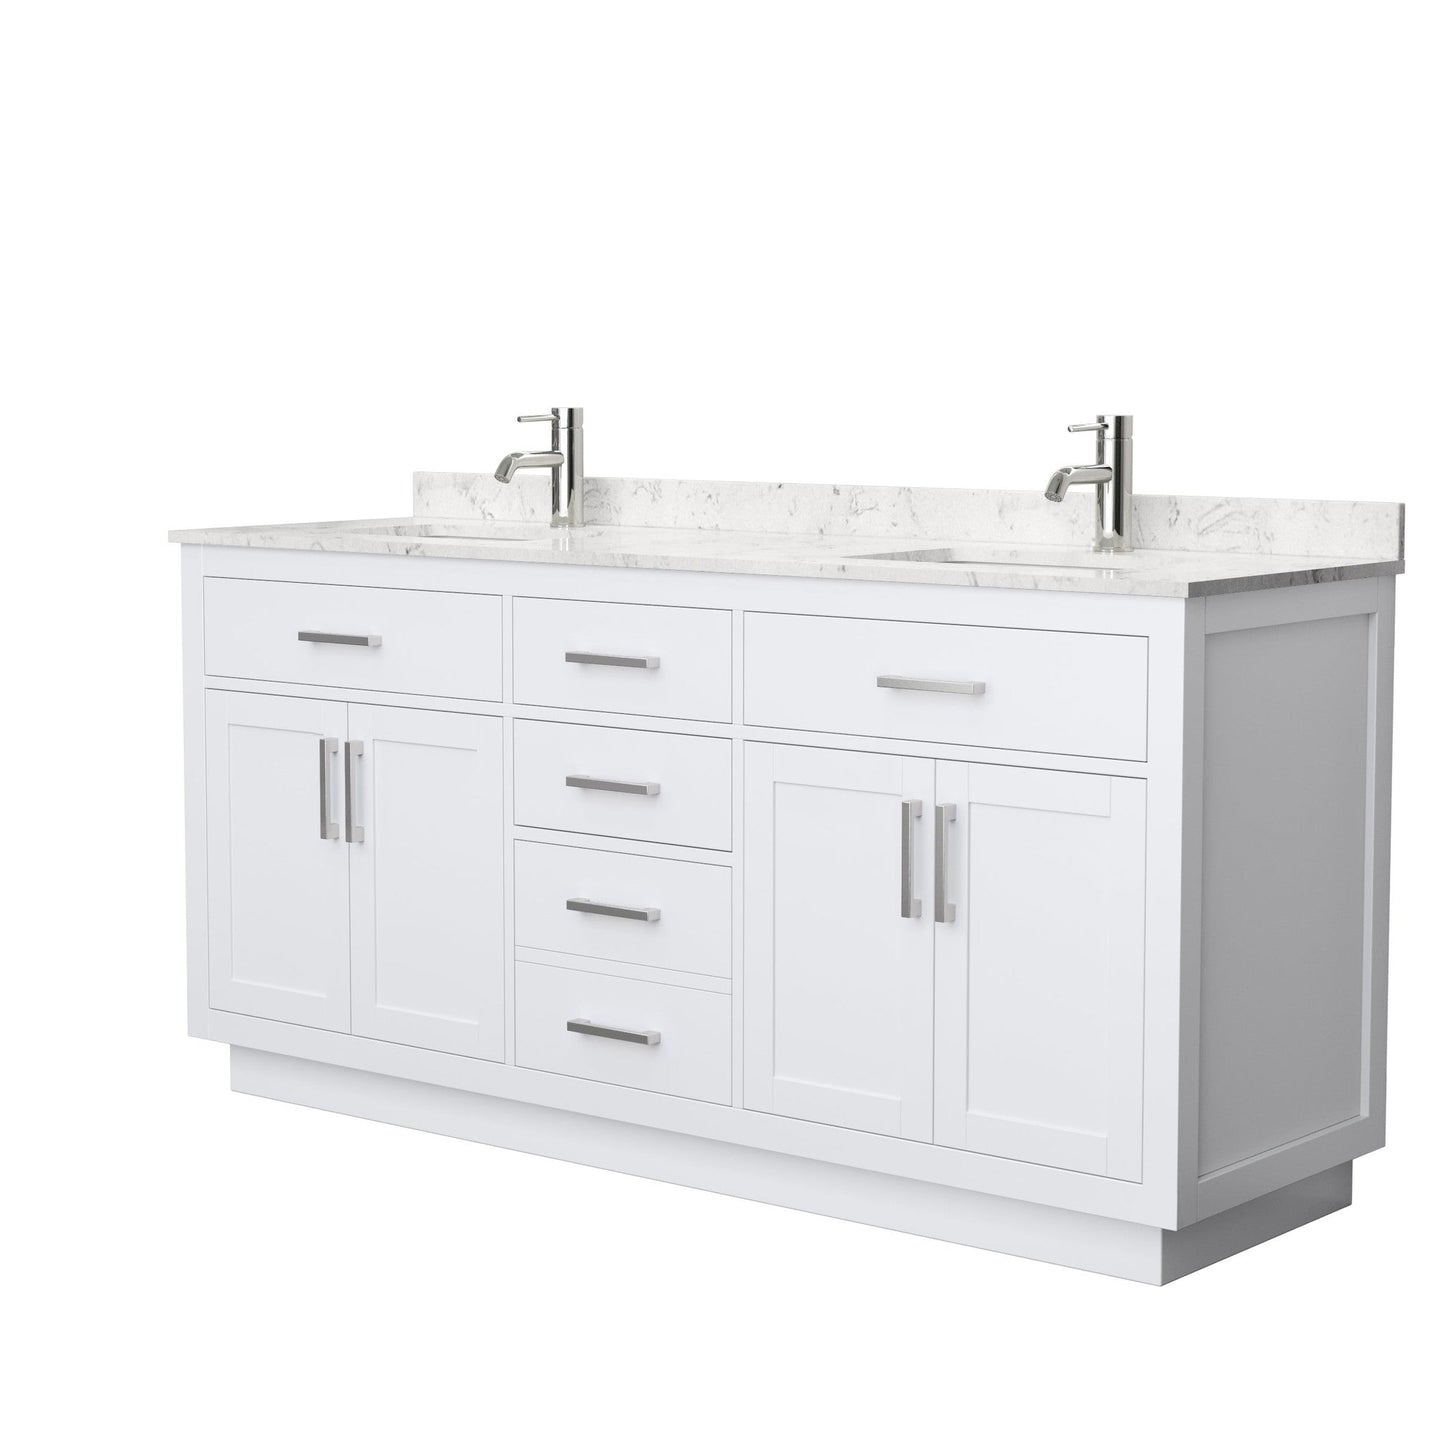 Beckett 72" Double Bathroom Vanity With Toe Kick in White, Carrara Cultured Marble Countertop, Undermount Square Sinks, Brushed Nickel Trim